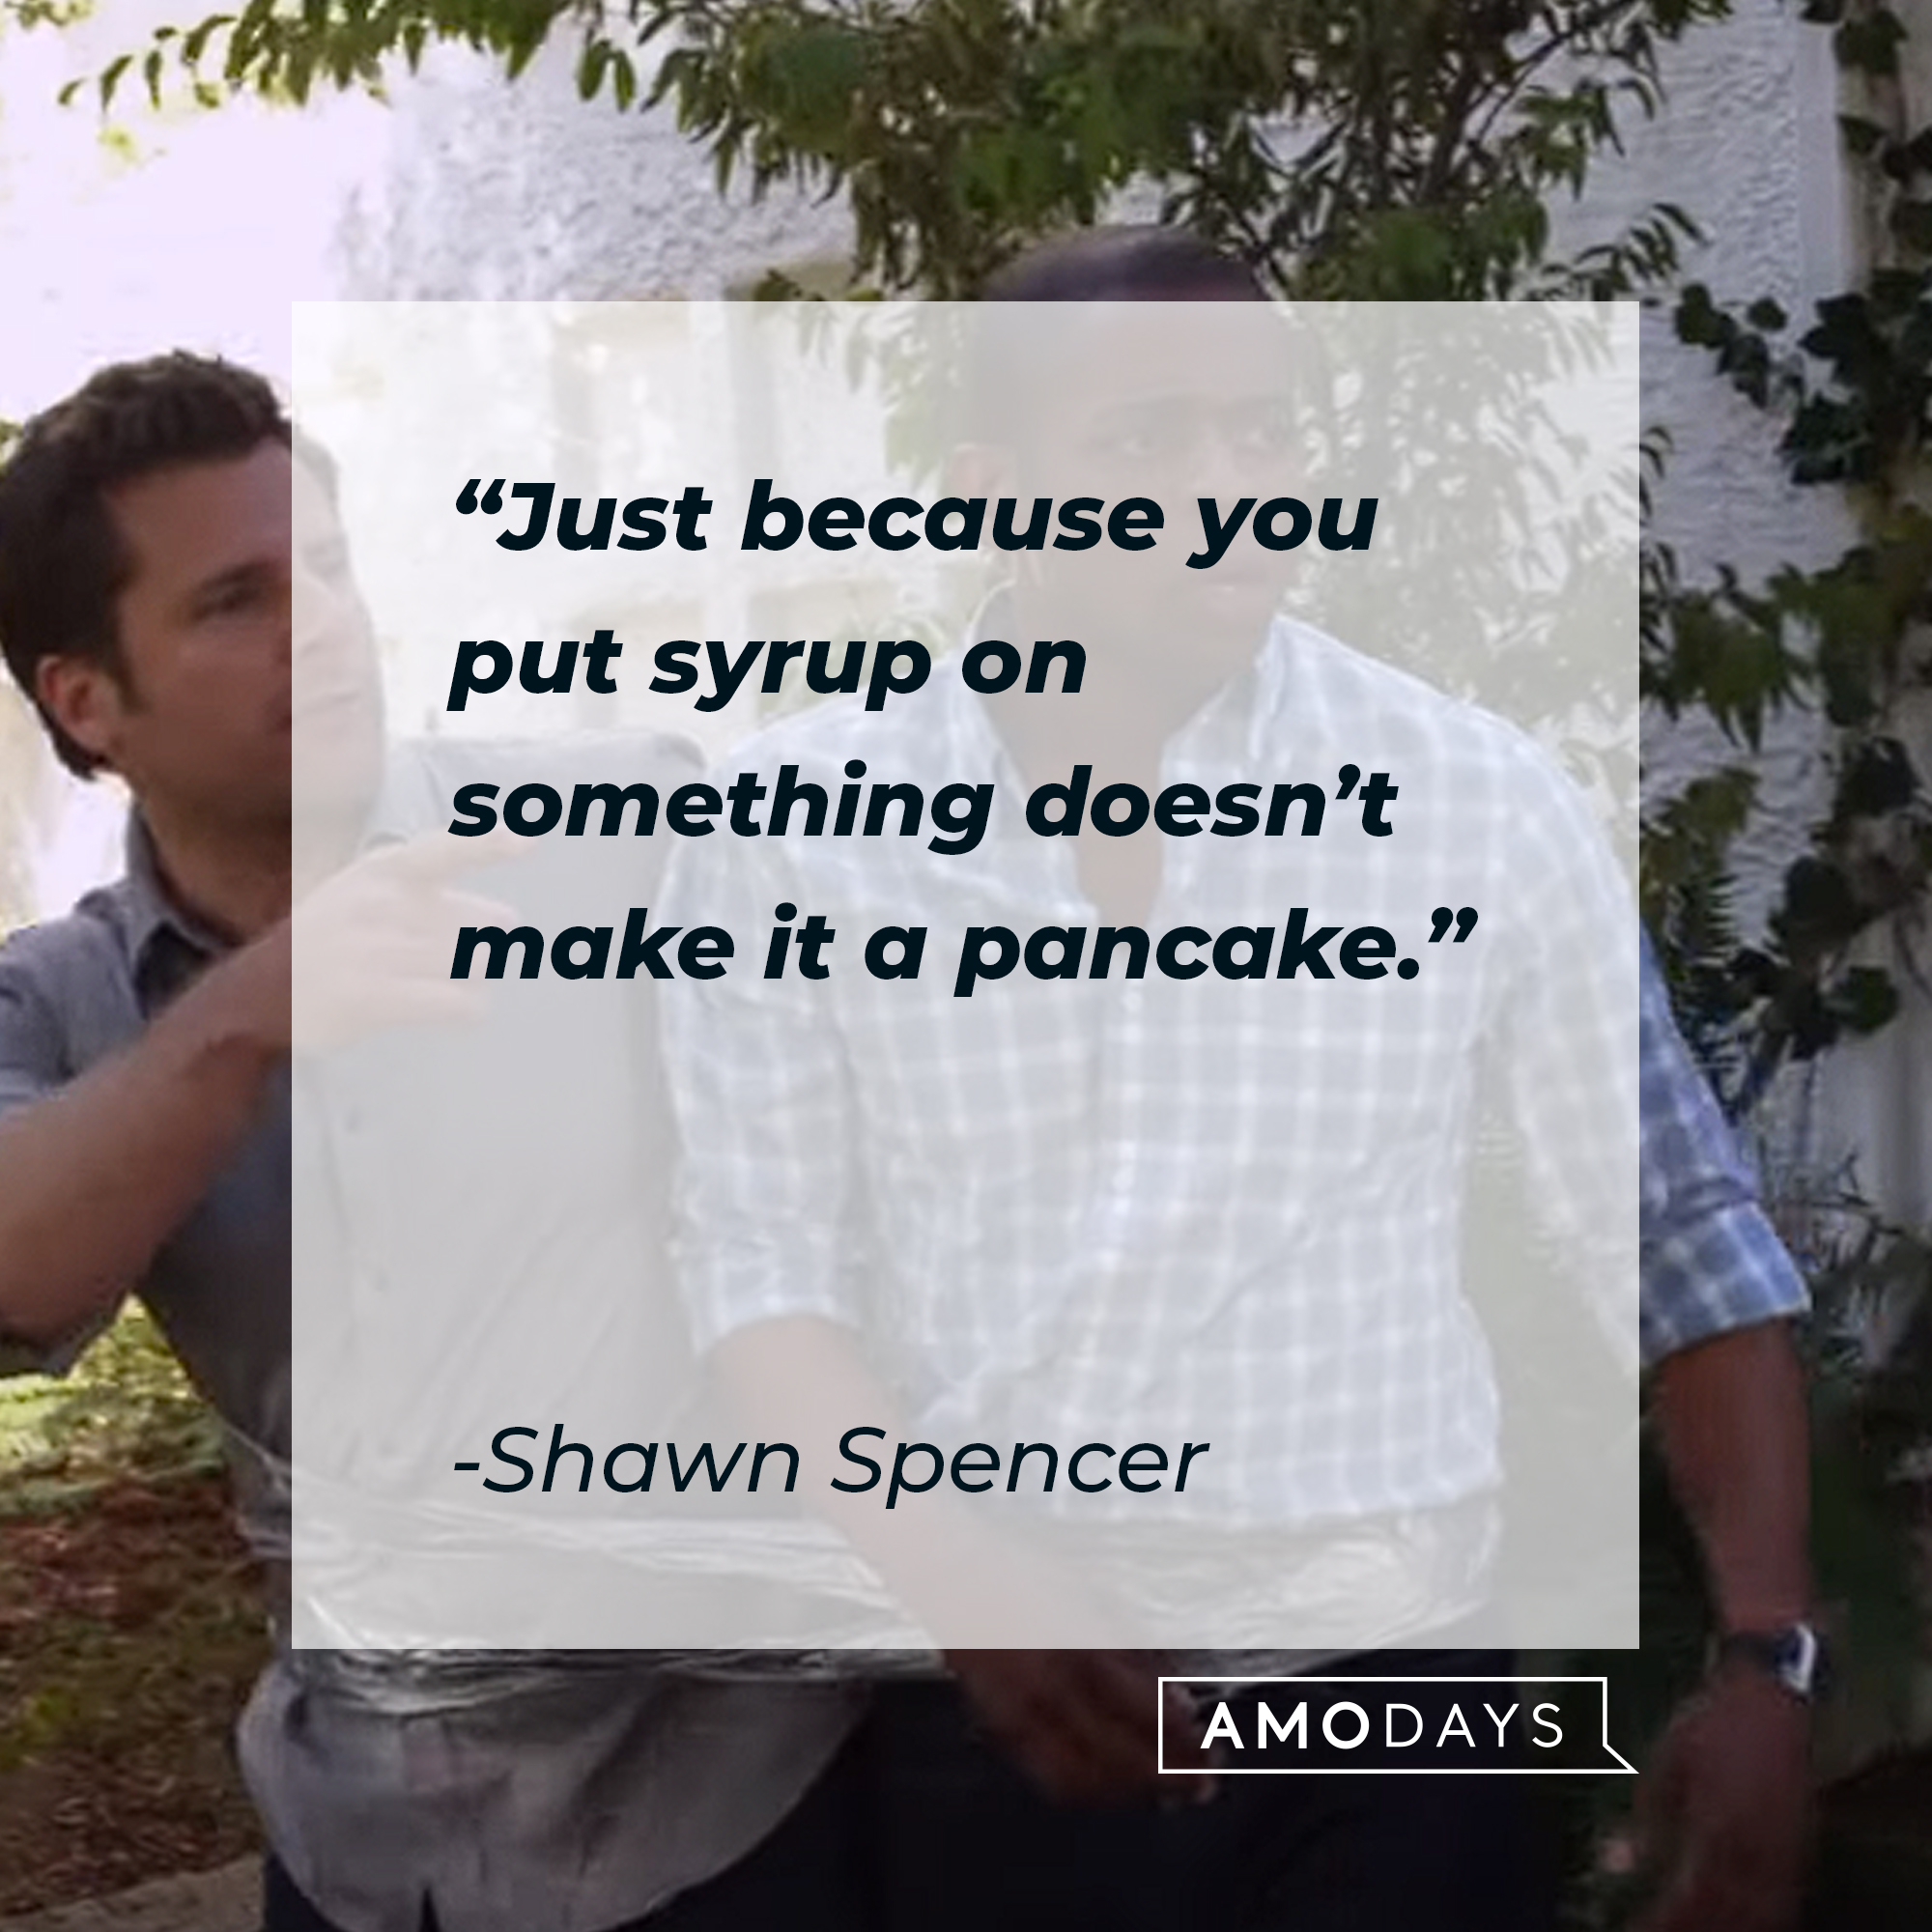 Shawn Spencer's quote: "Just because you put syrup on something doesn't make it a pancake." | Source: youtube.com/Psych